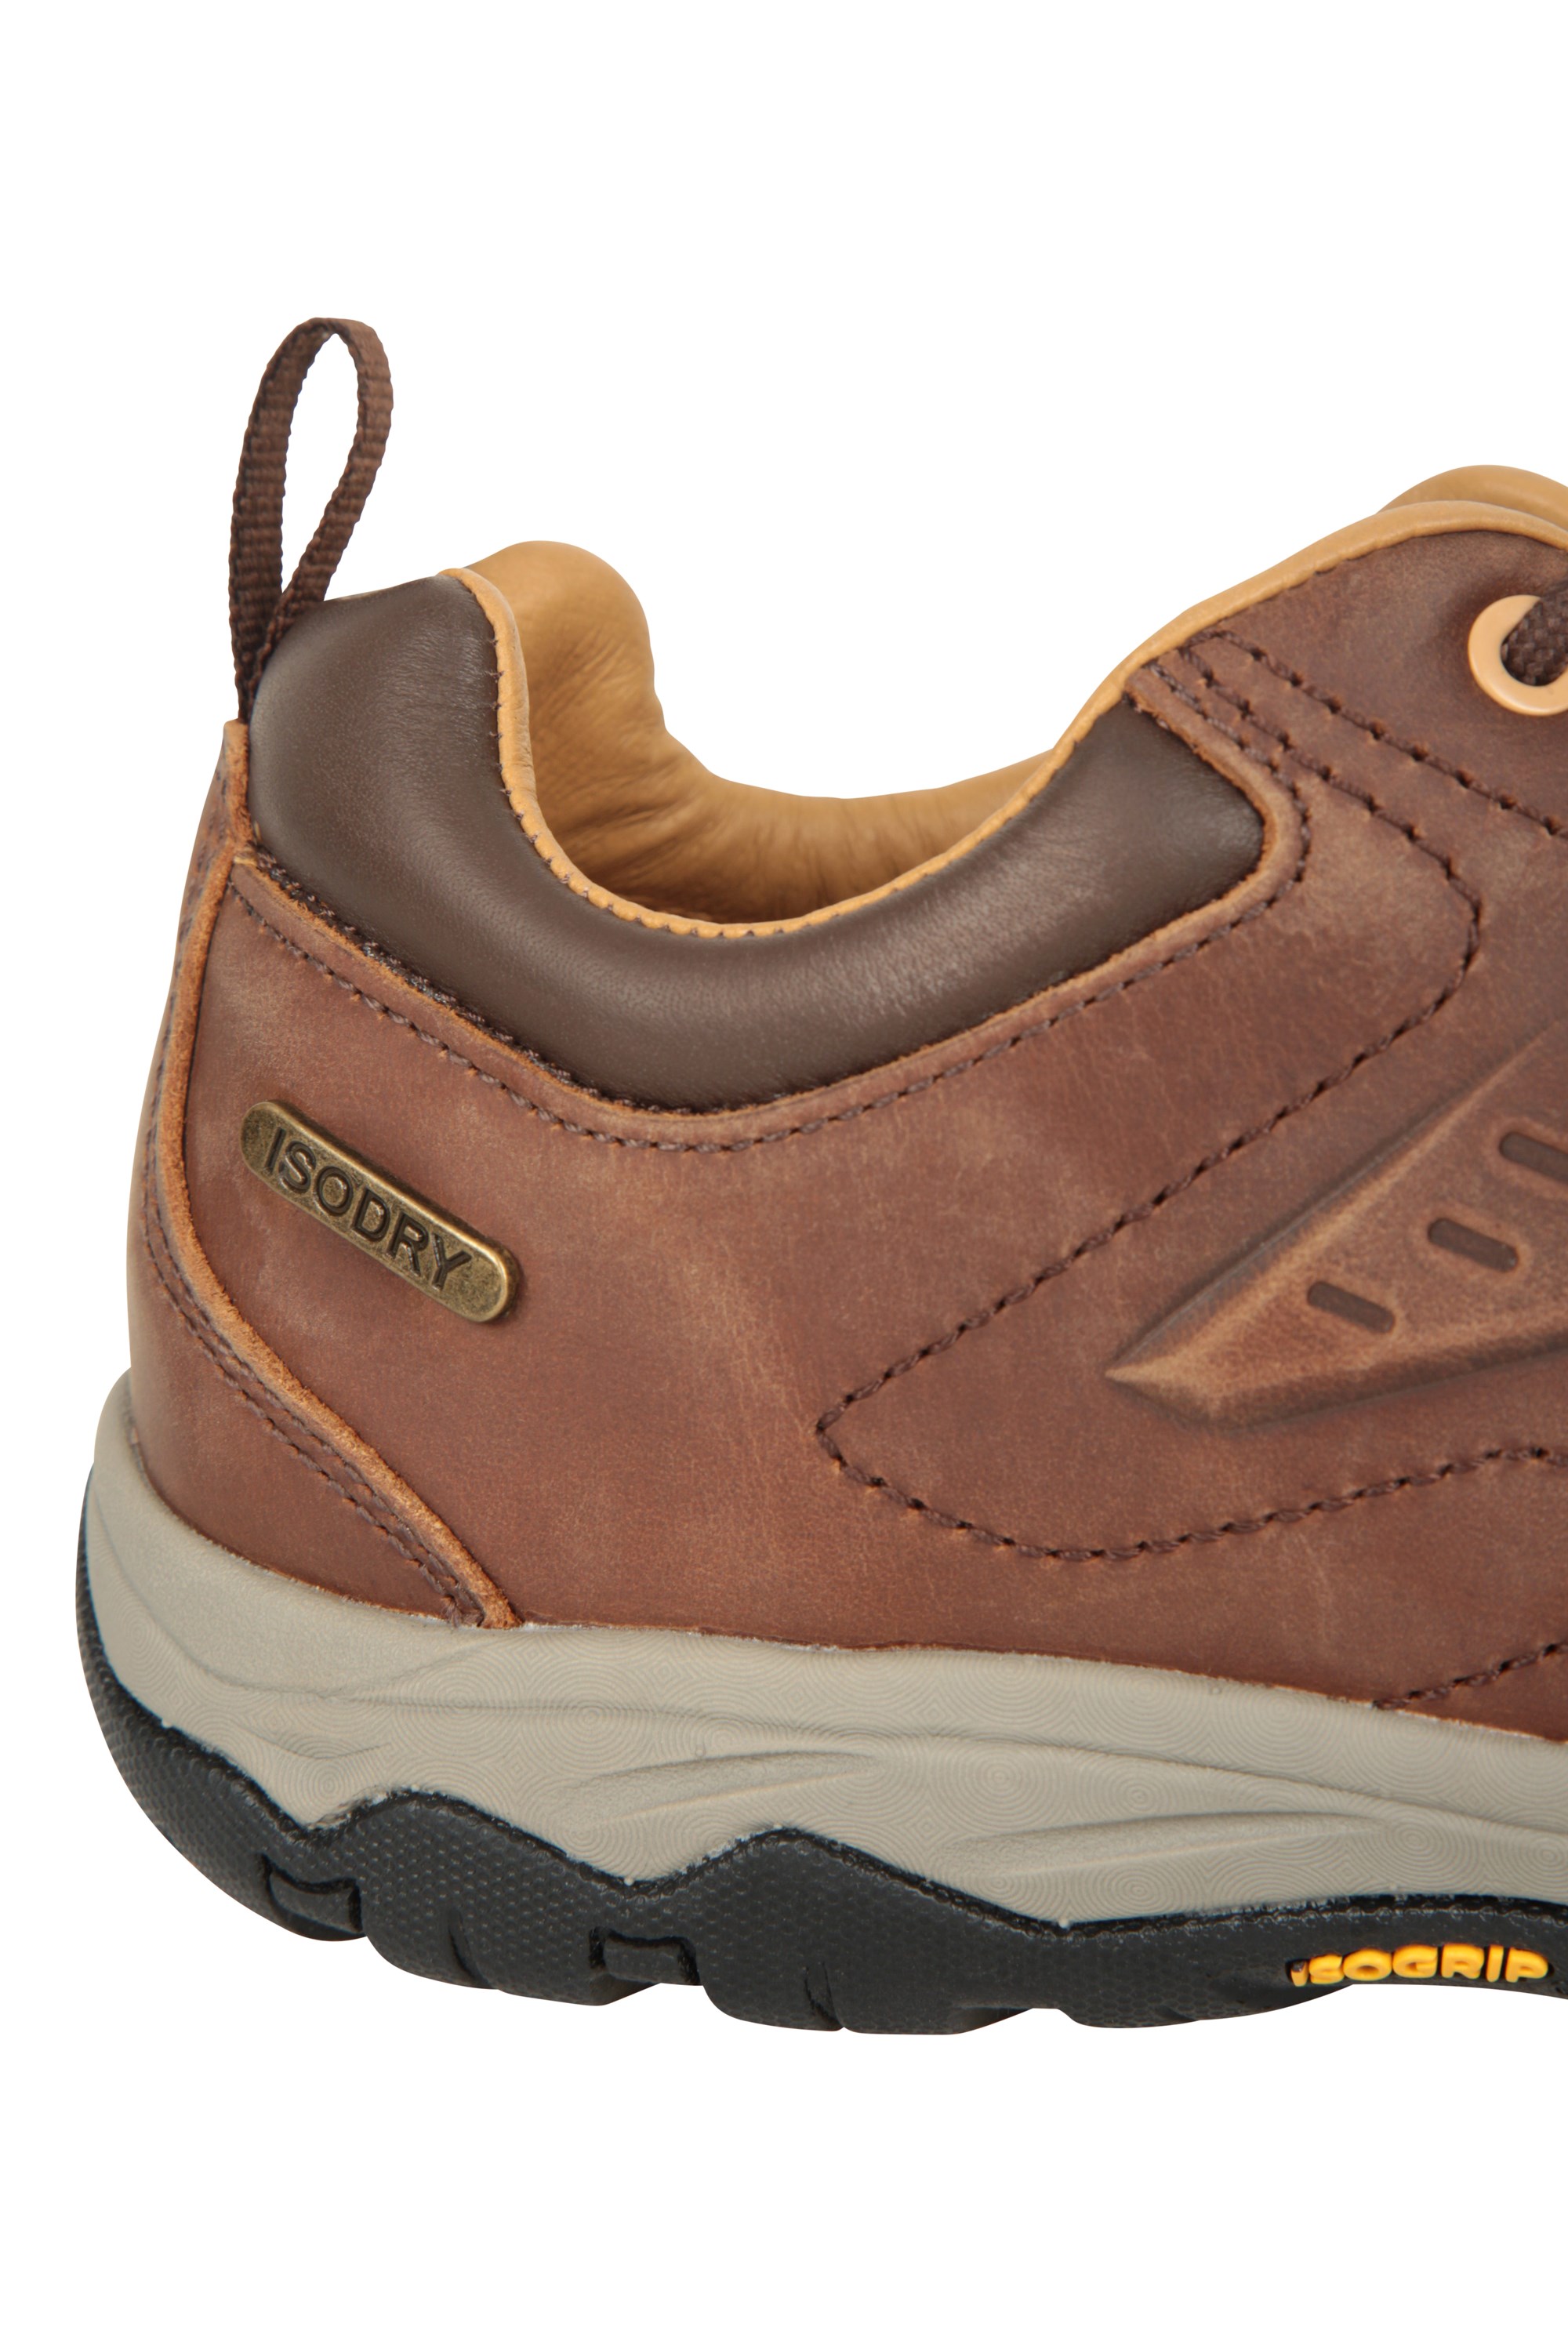 Extreme Pioneer Womens Hiking Shoes